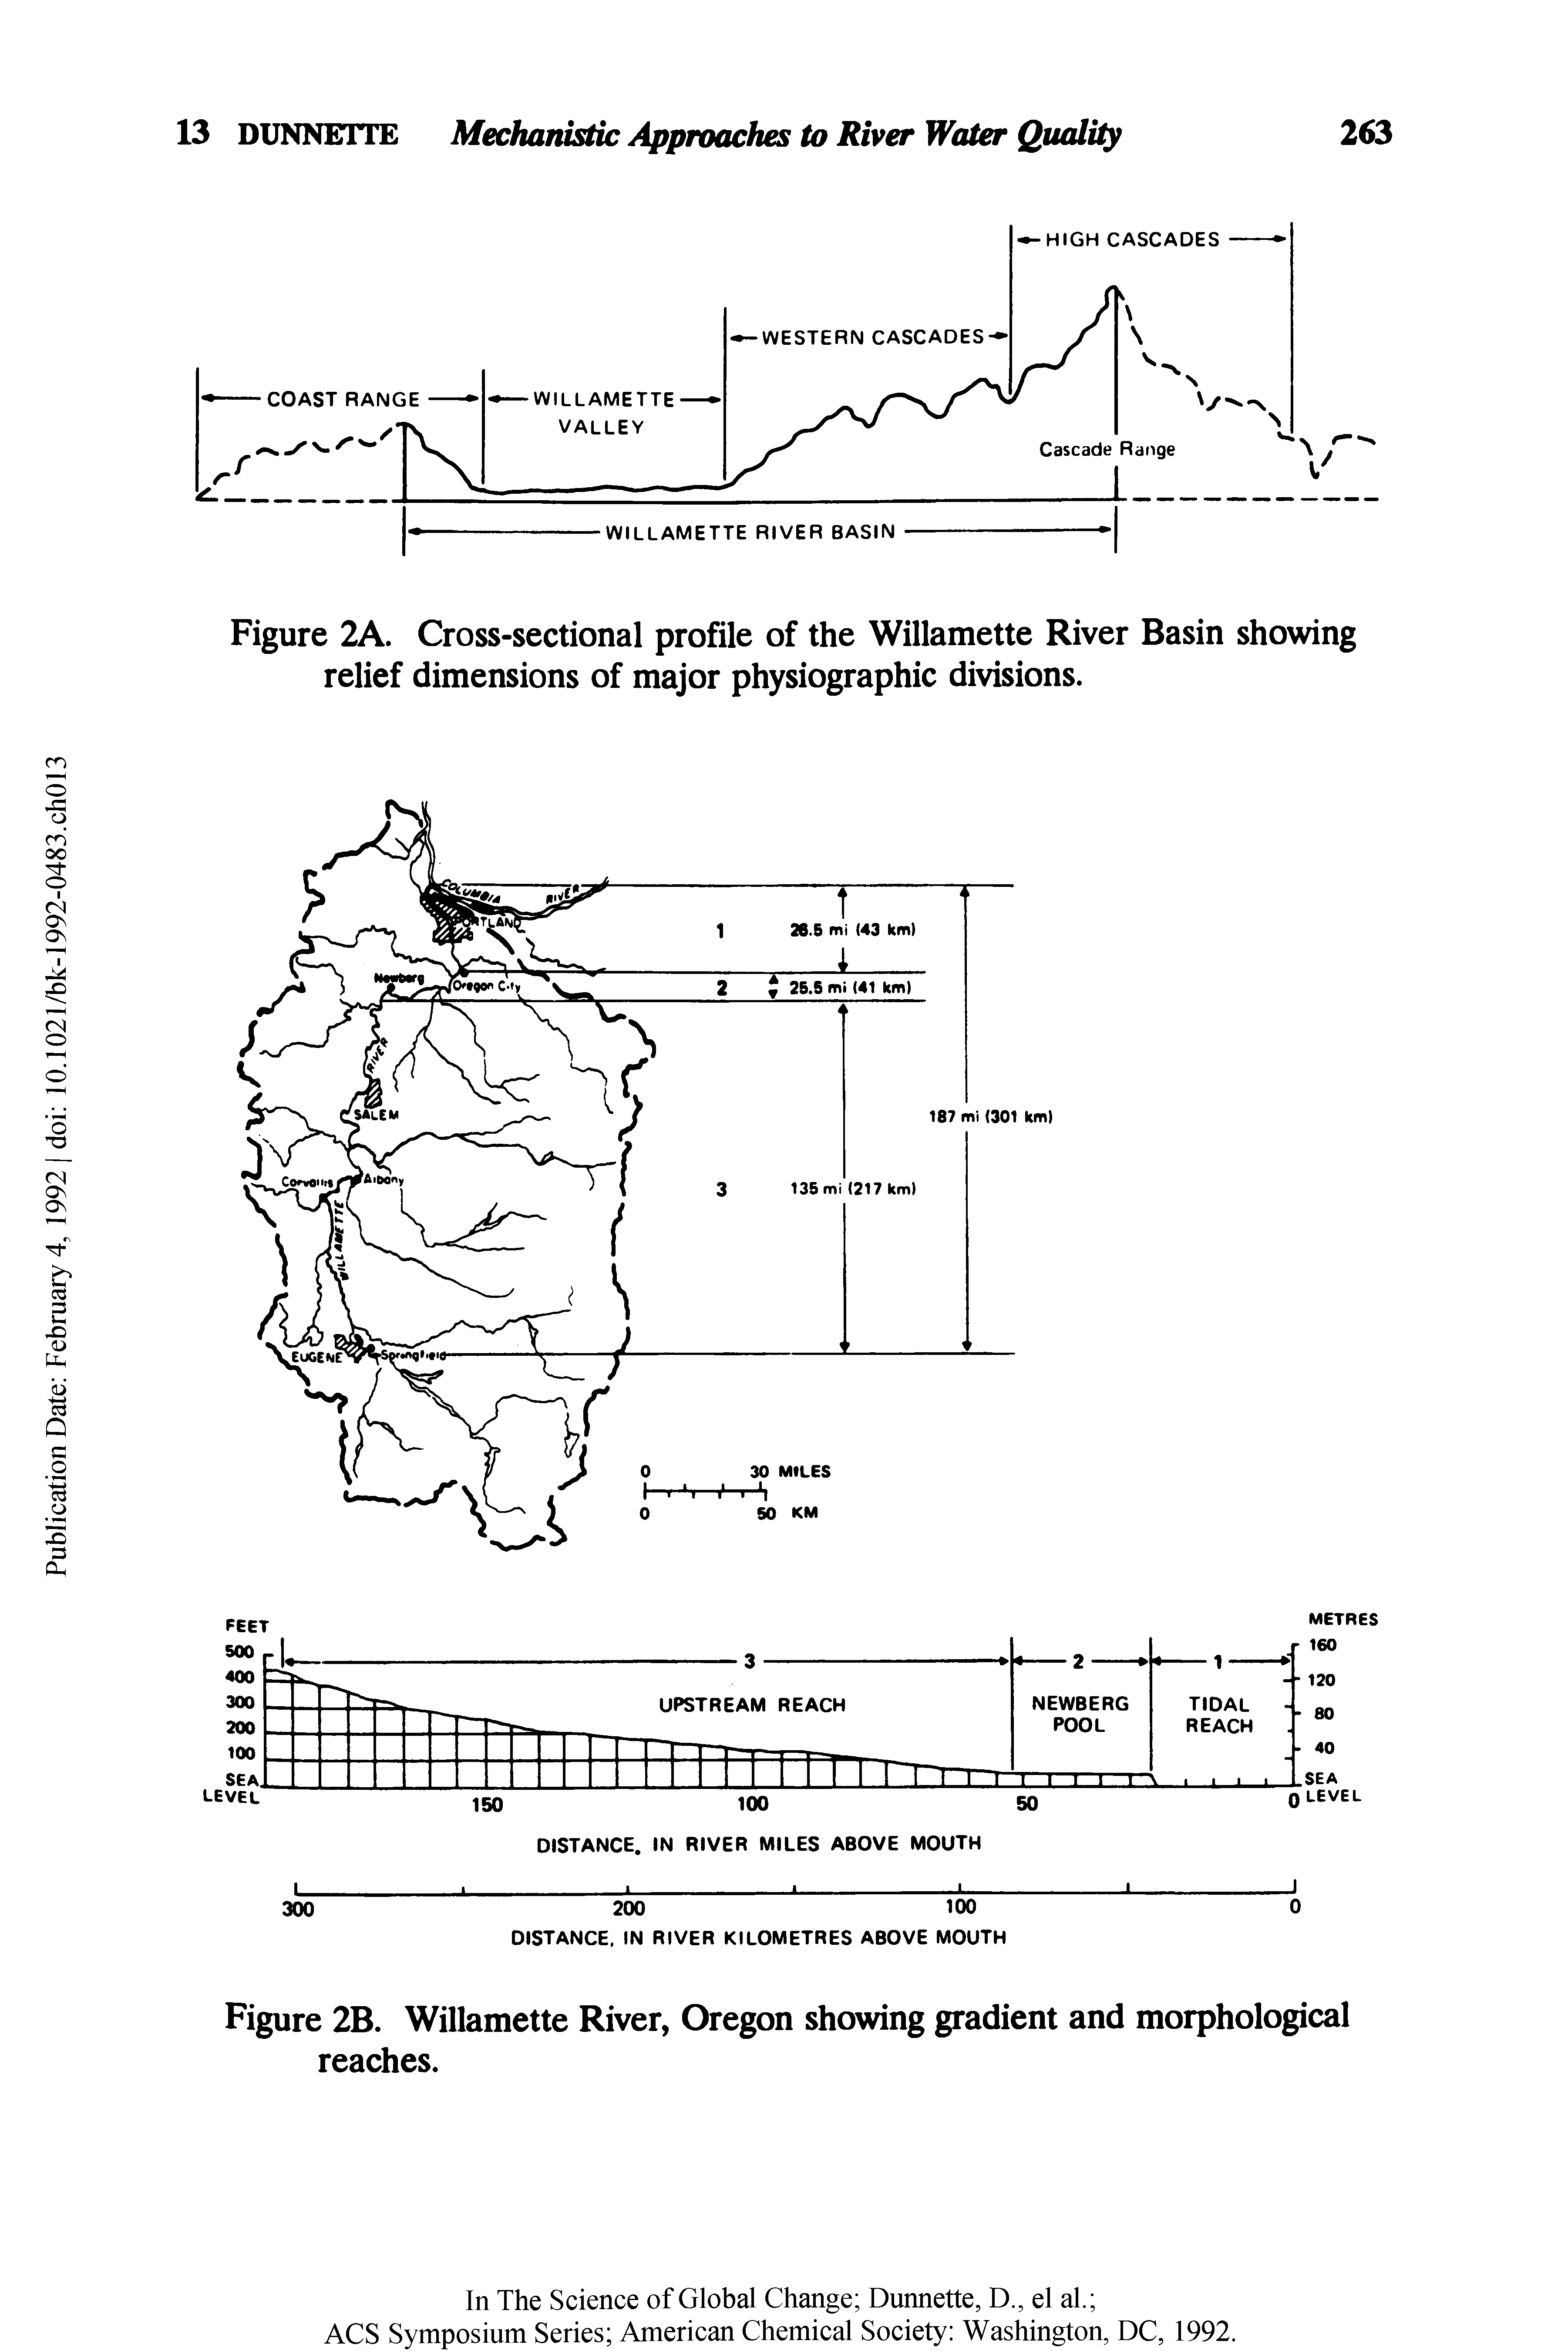 Figure 2A. Cross-sectional profile of the Willamette River Basin showing relief dimensions of major physiographic divisions.